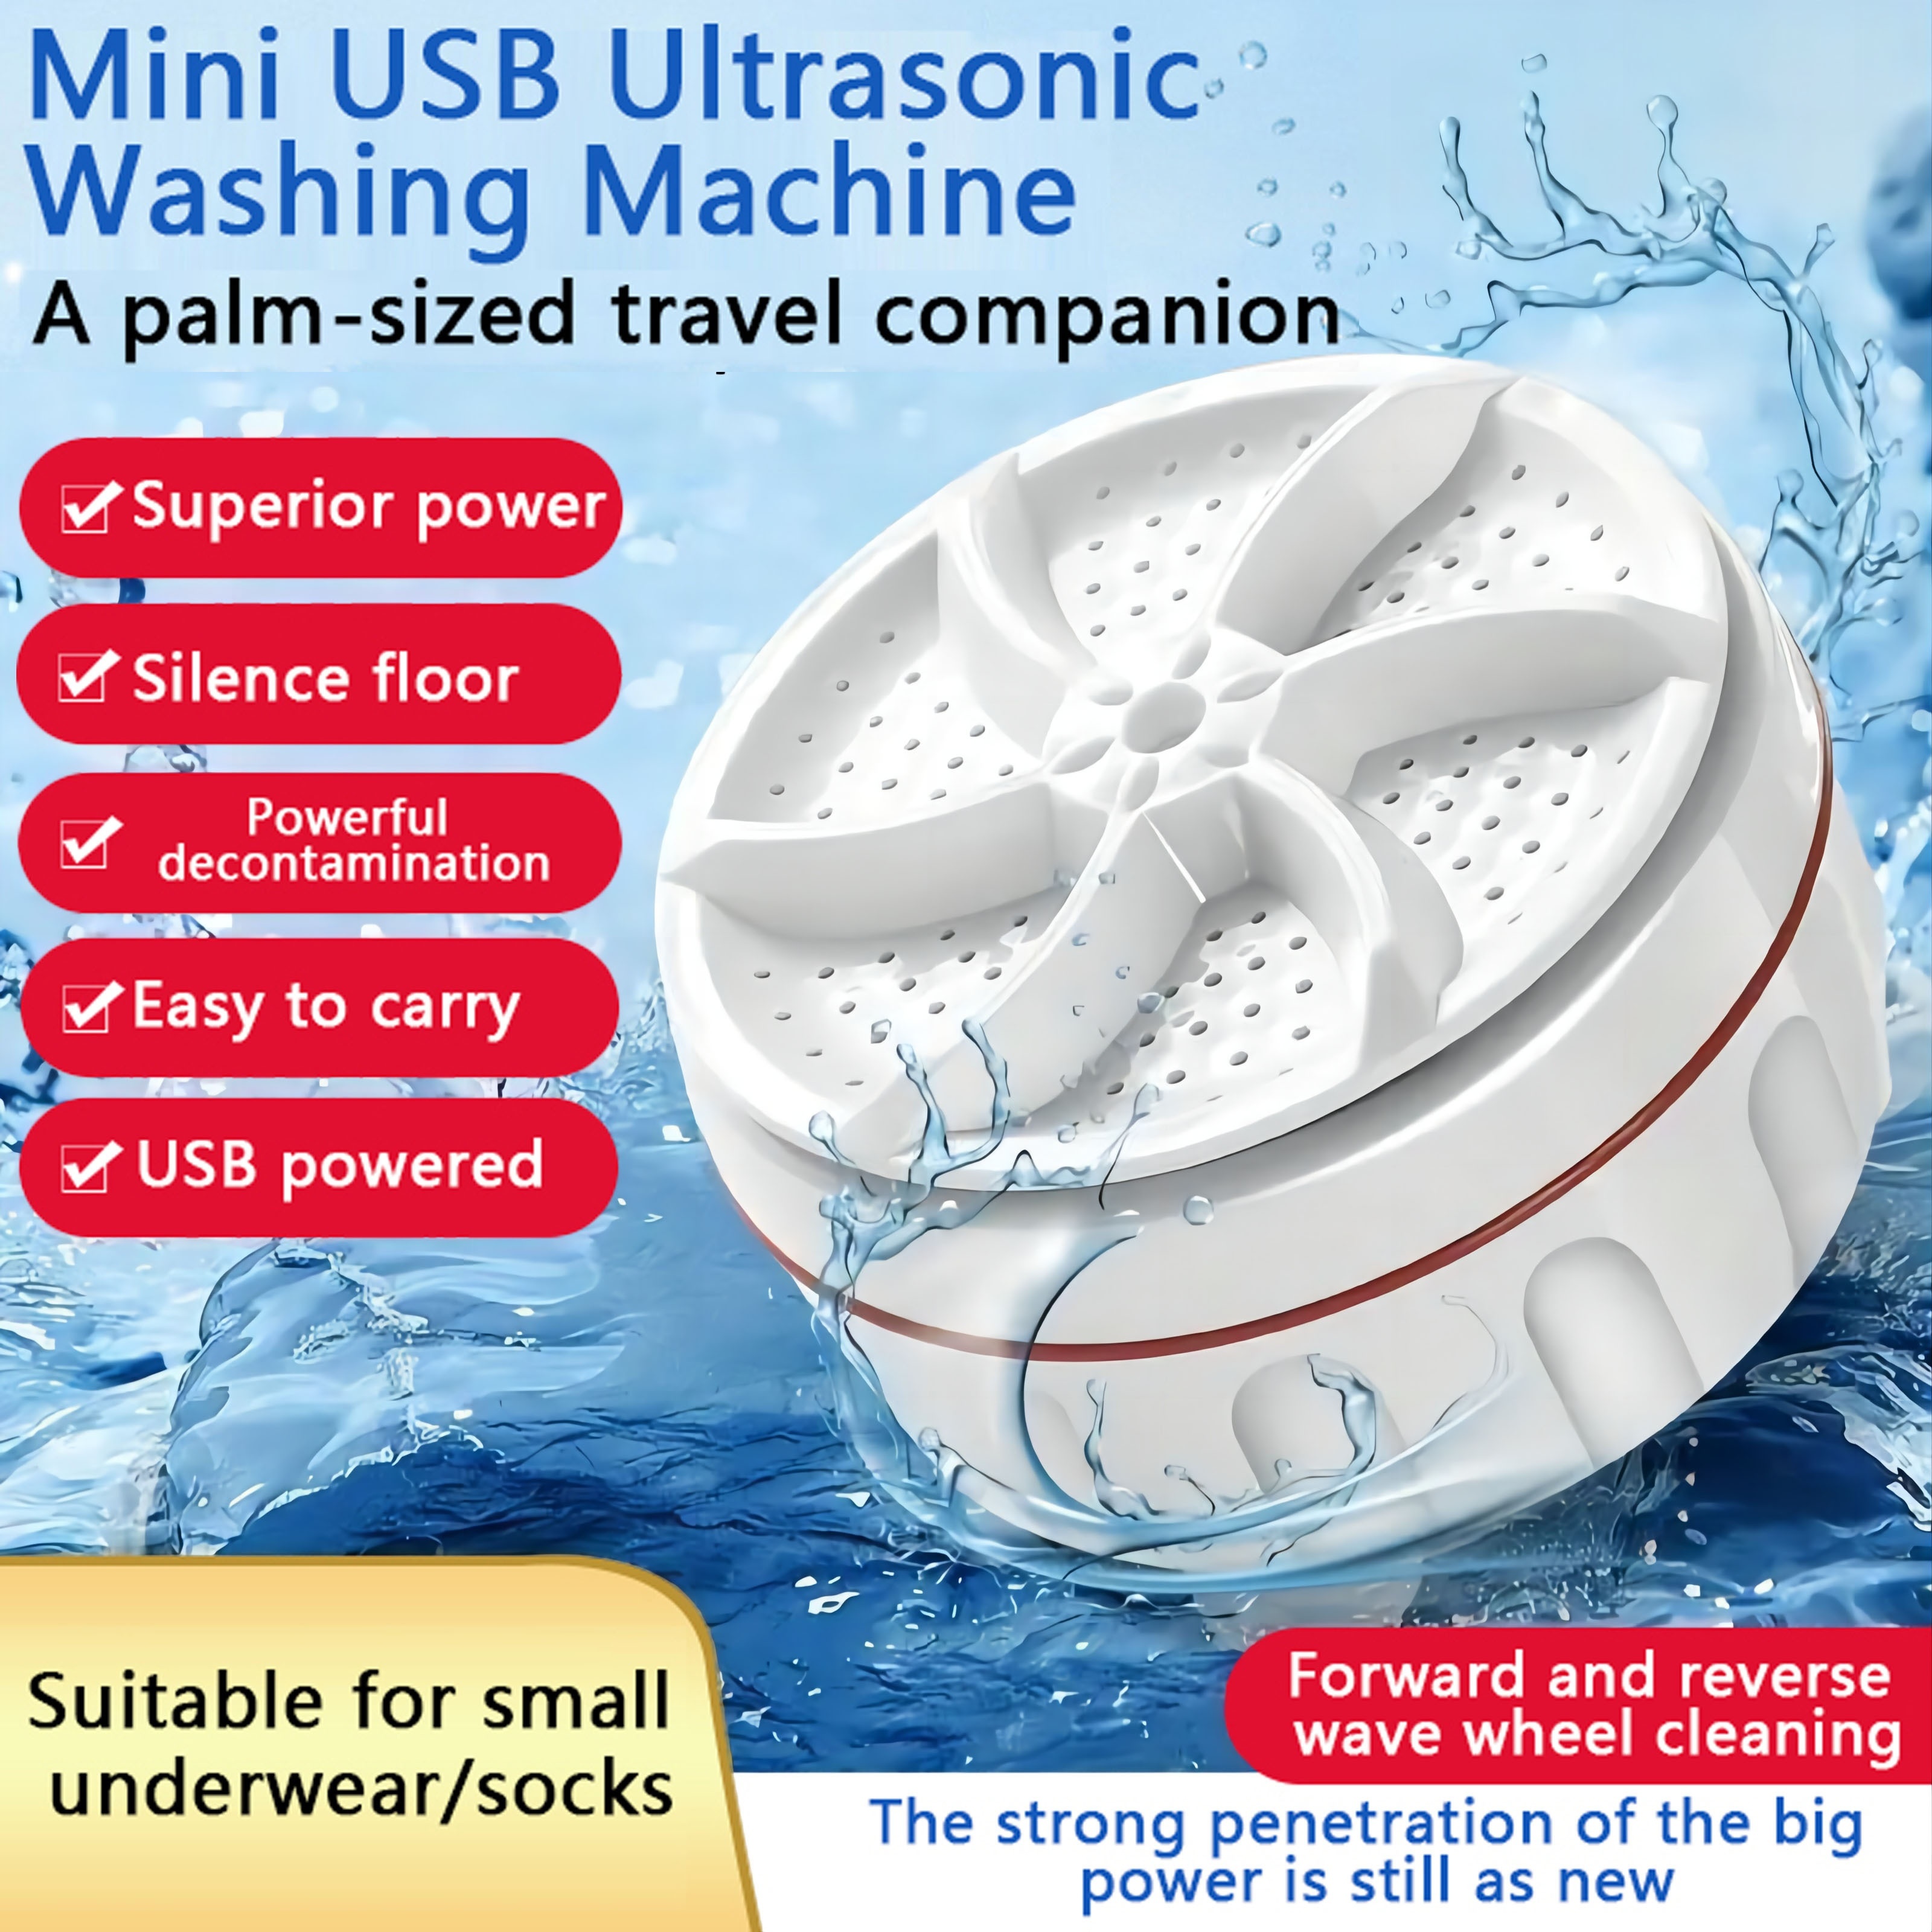 

1pc Portable Mini Turbo Washing Machine, Which Can Clean Underwear, Briefs, Socks, Tableware And So On, Is Suitable For Traveling At Home And On Business Trips